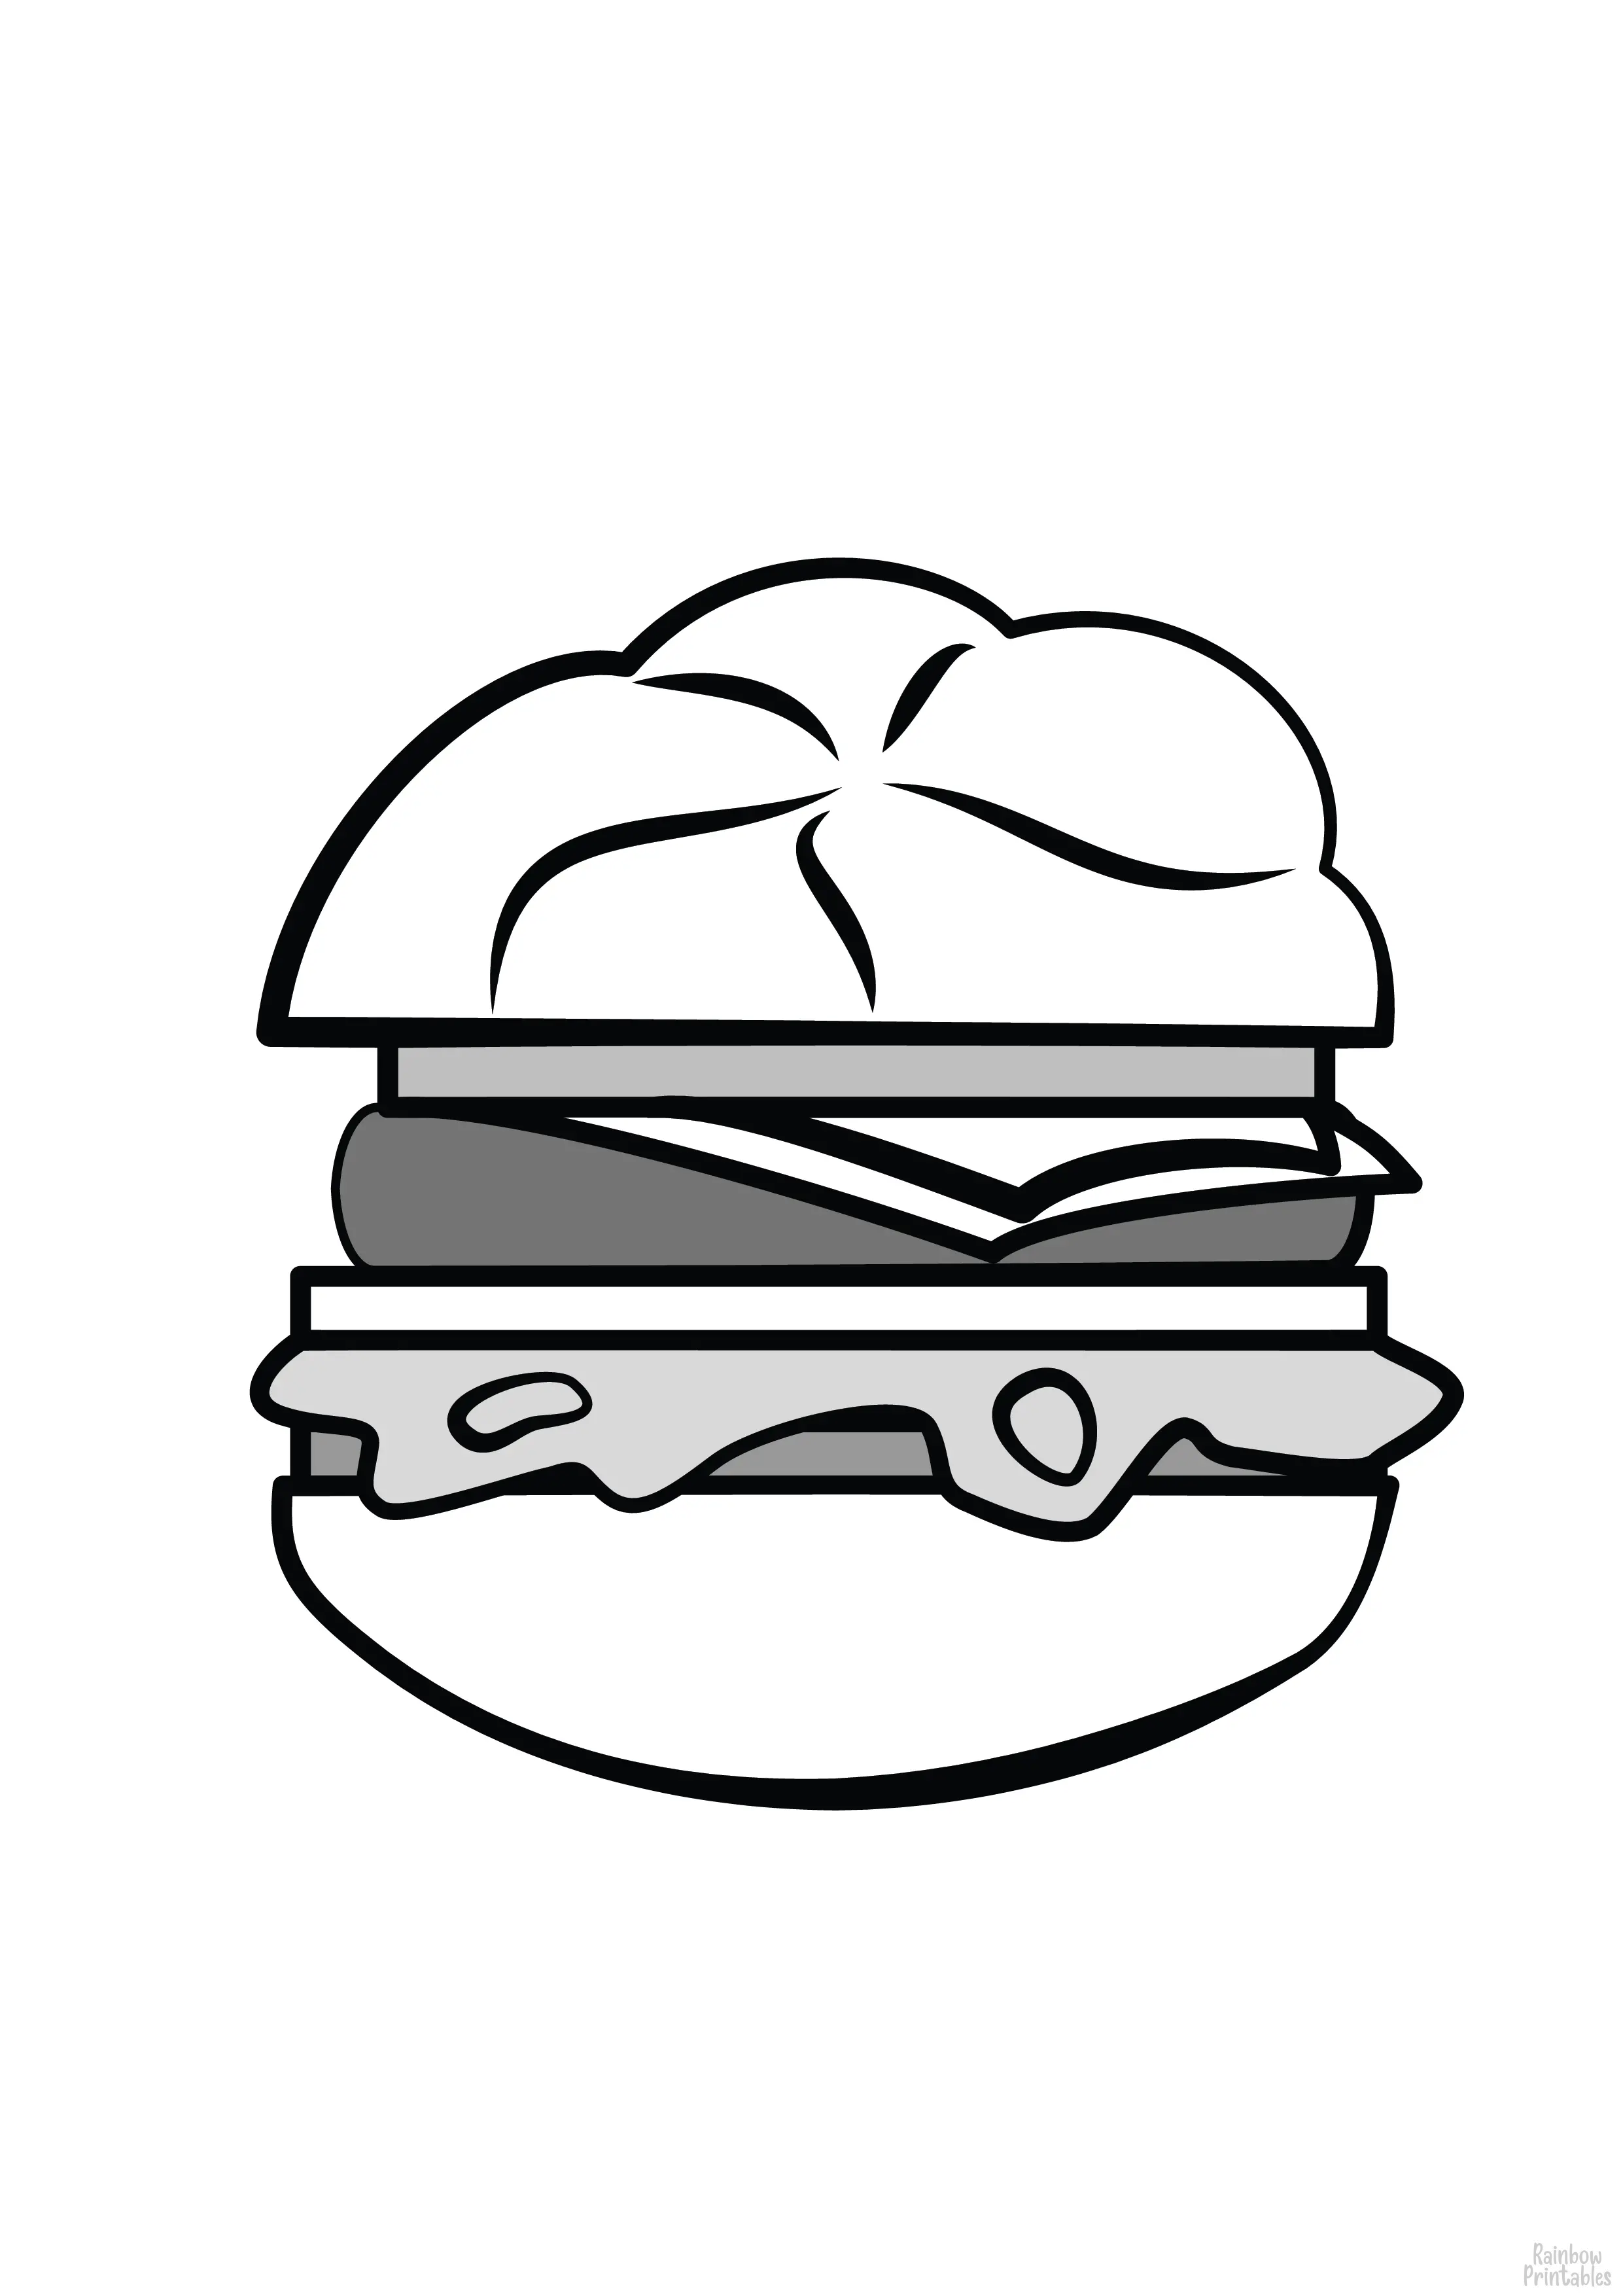 BURGER Clipart Coloring Pages Line Art Drawings for Kids-01